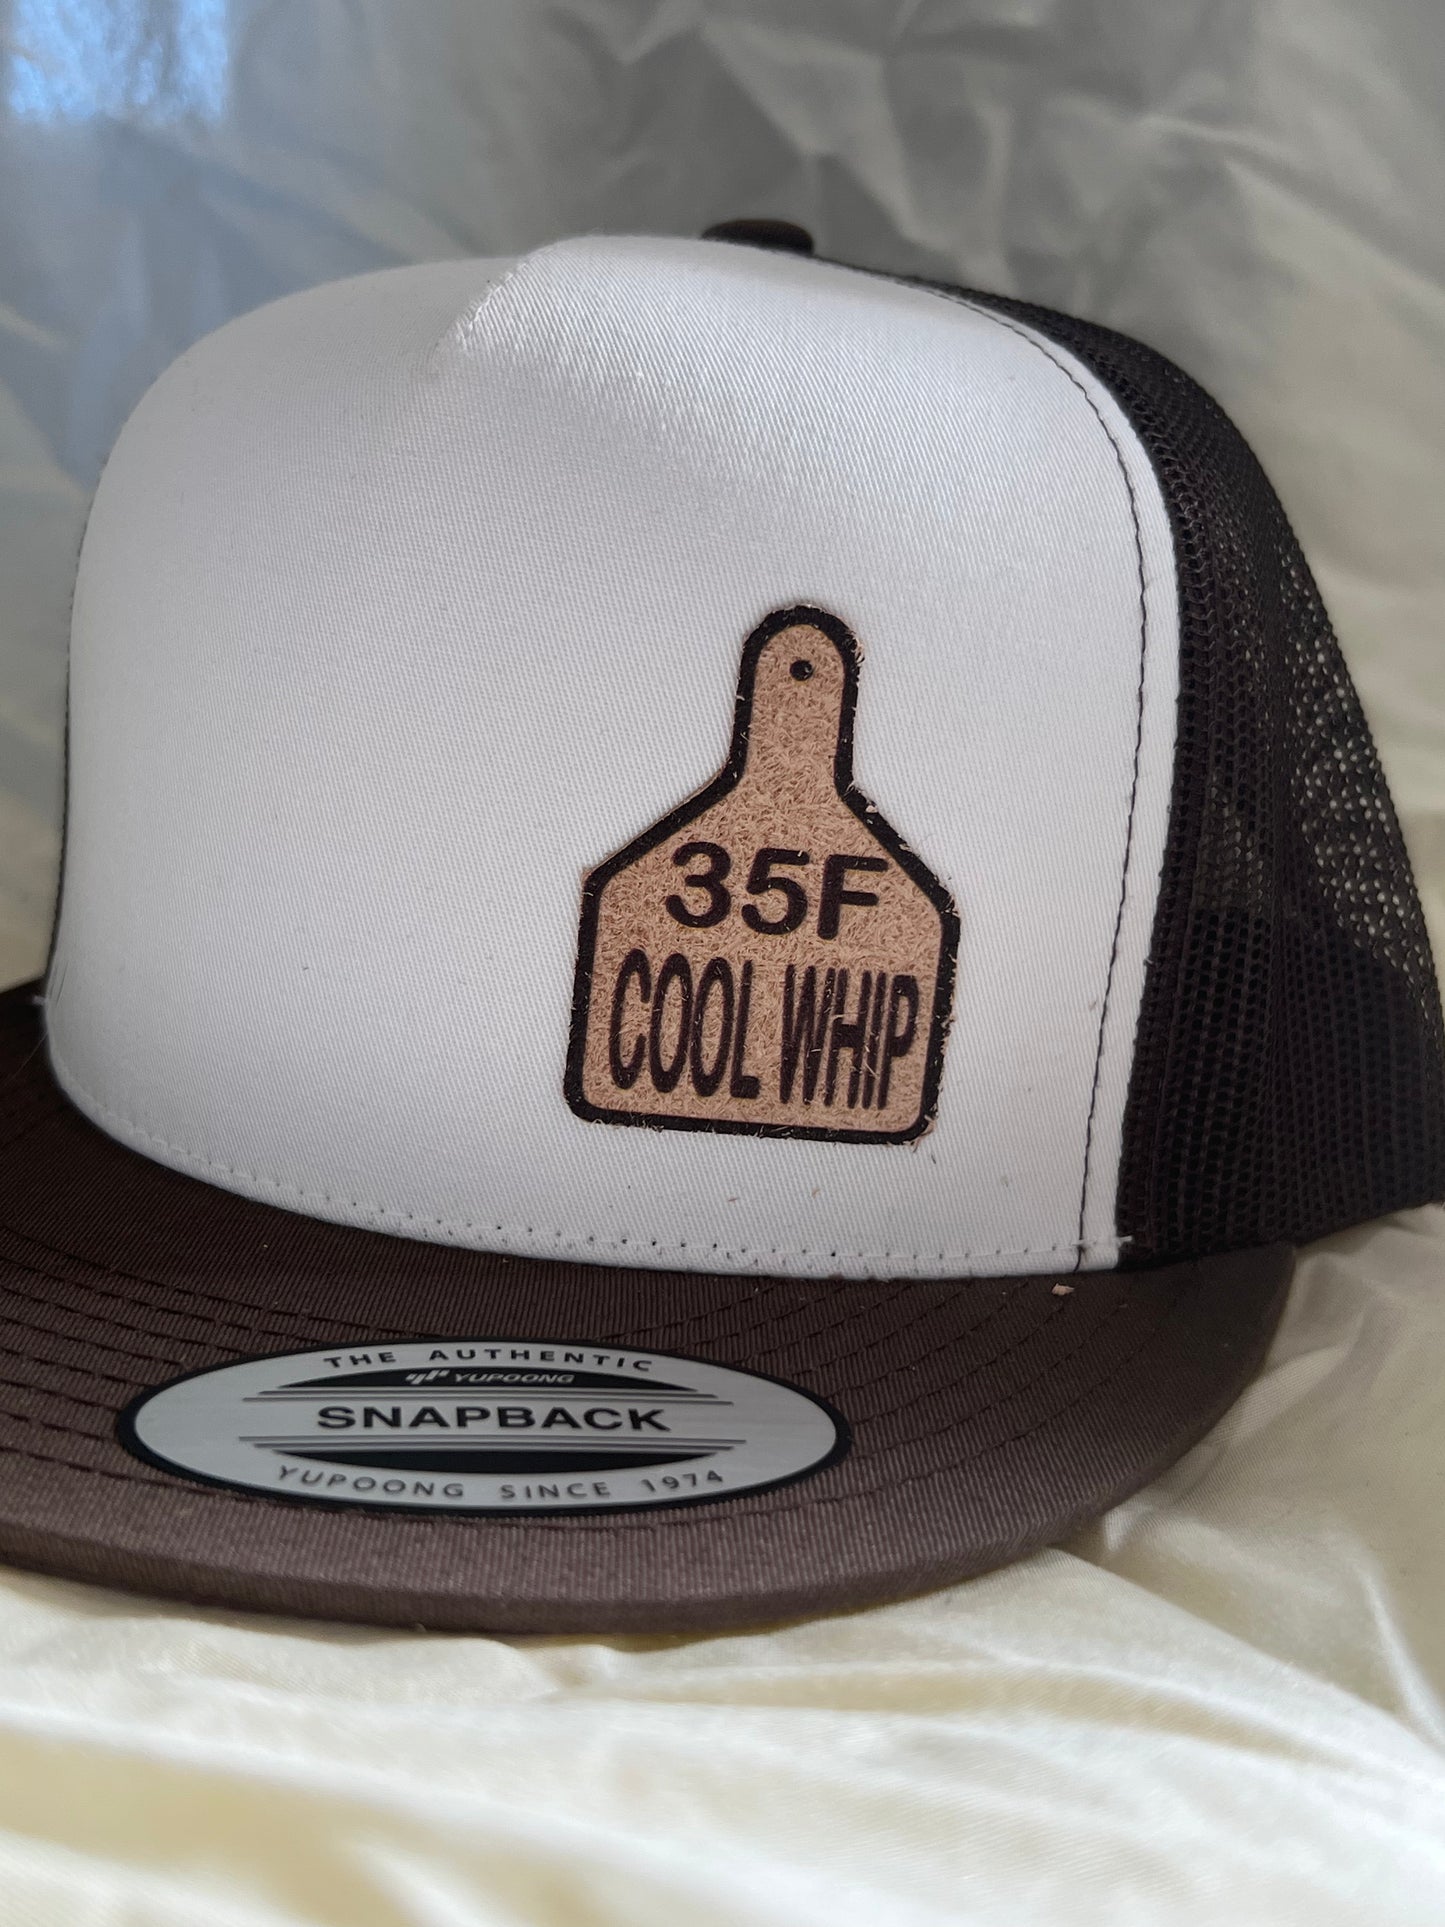 Cool Whip brown Flat hat